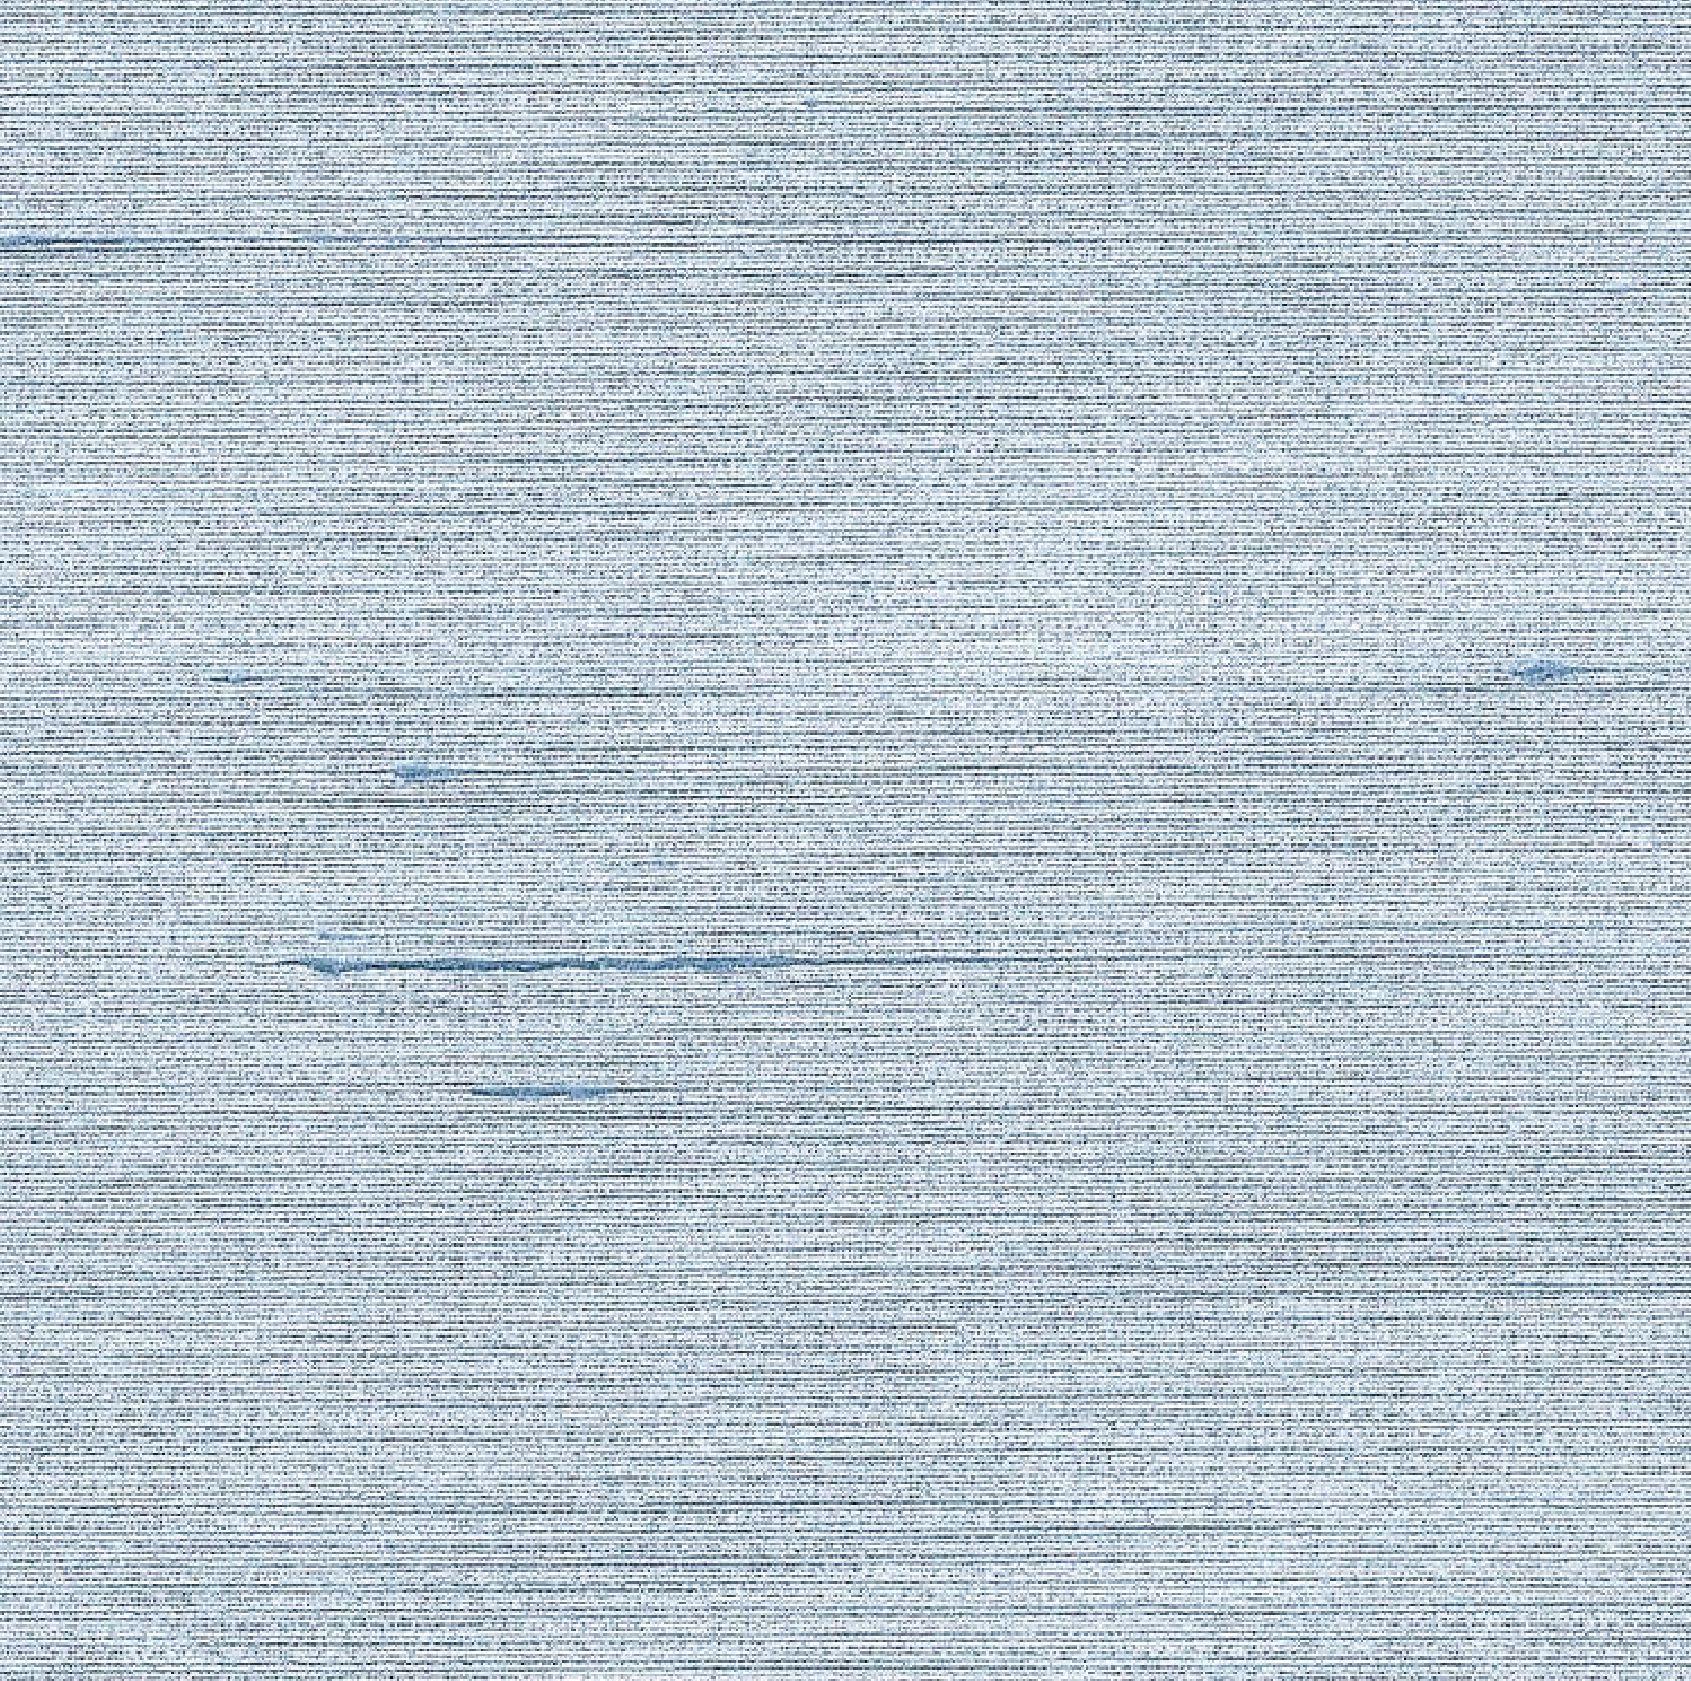 Phillip Jeffries silk star dust celestial blue textile wallpaper. Listing is for one 8-yard roll. Retails for 197 USD per yard or approximately 1600 USD per 8-yard roll. Multiple rolls available. Please change quantity to purchase more than one roll.